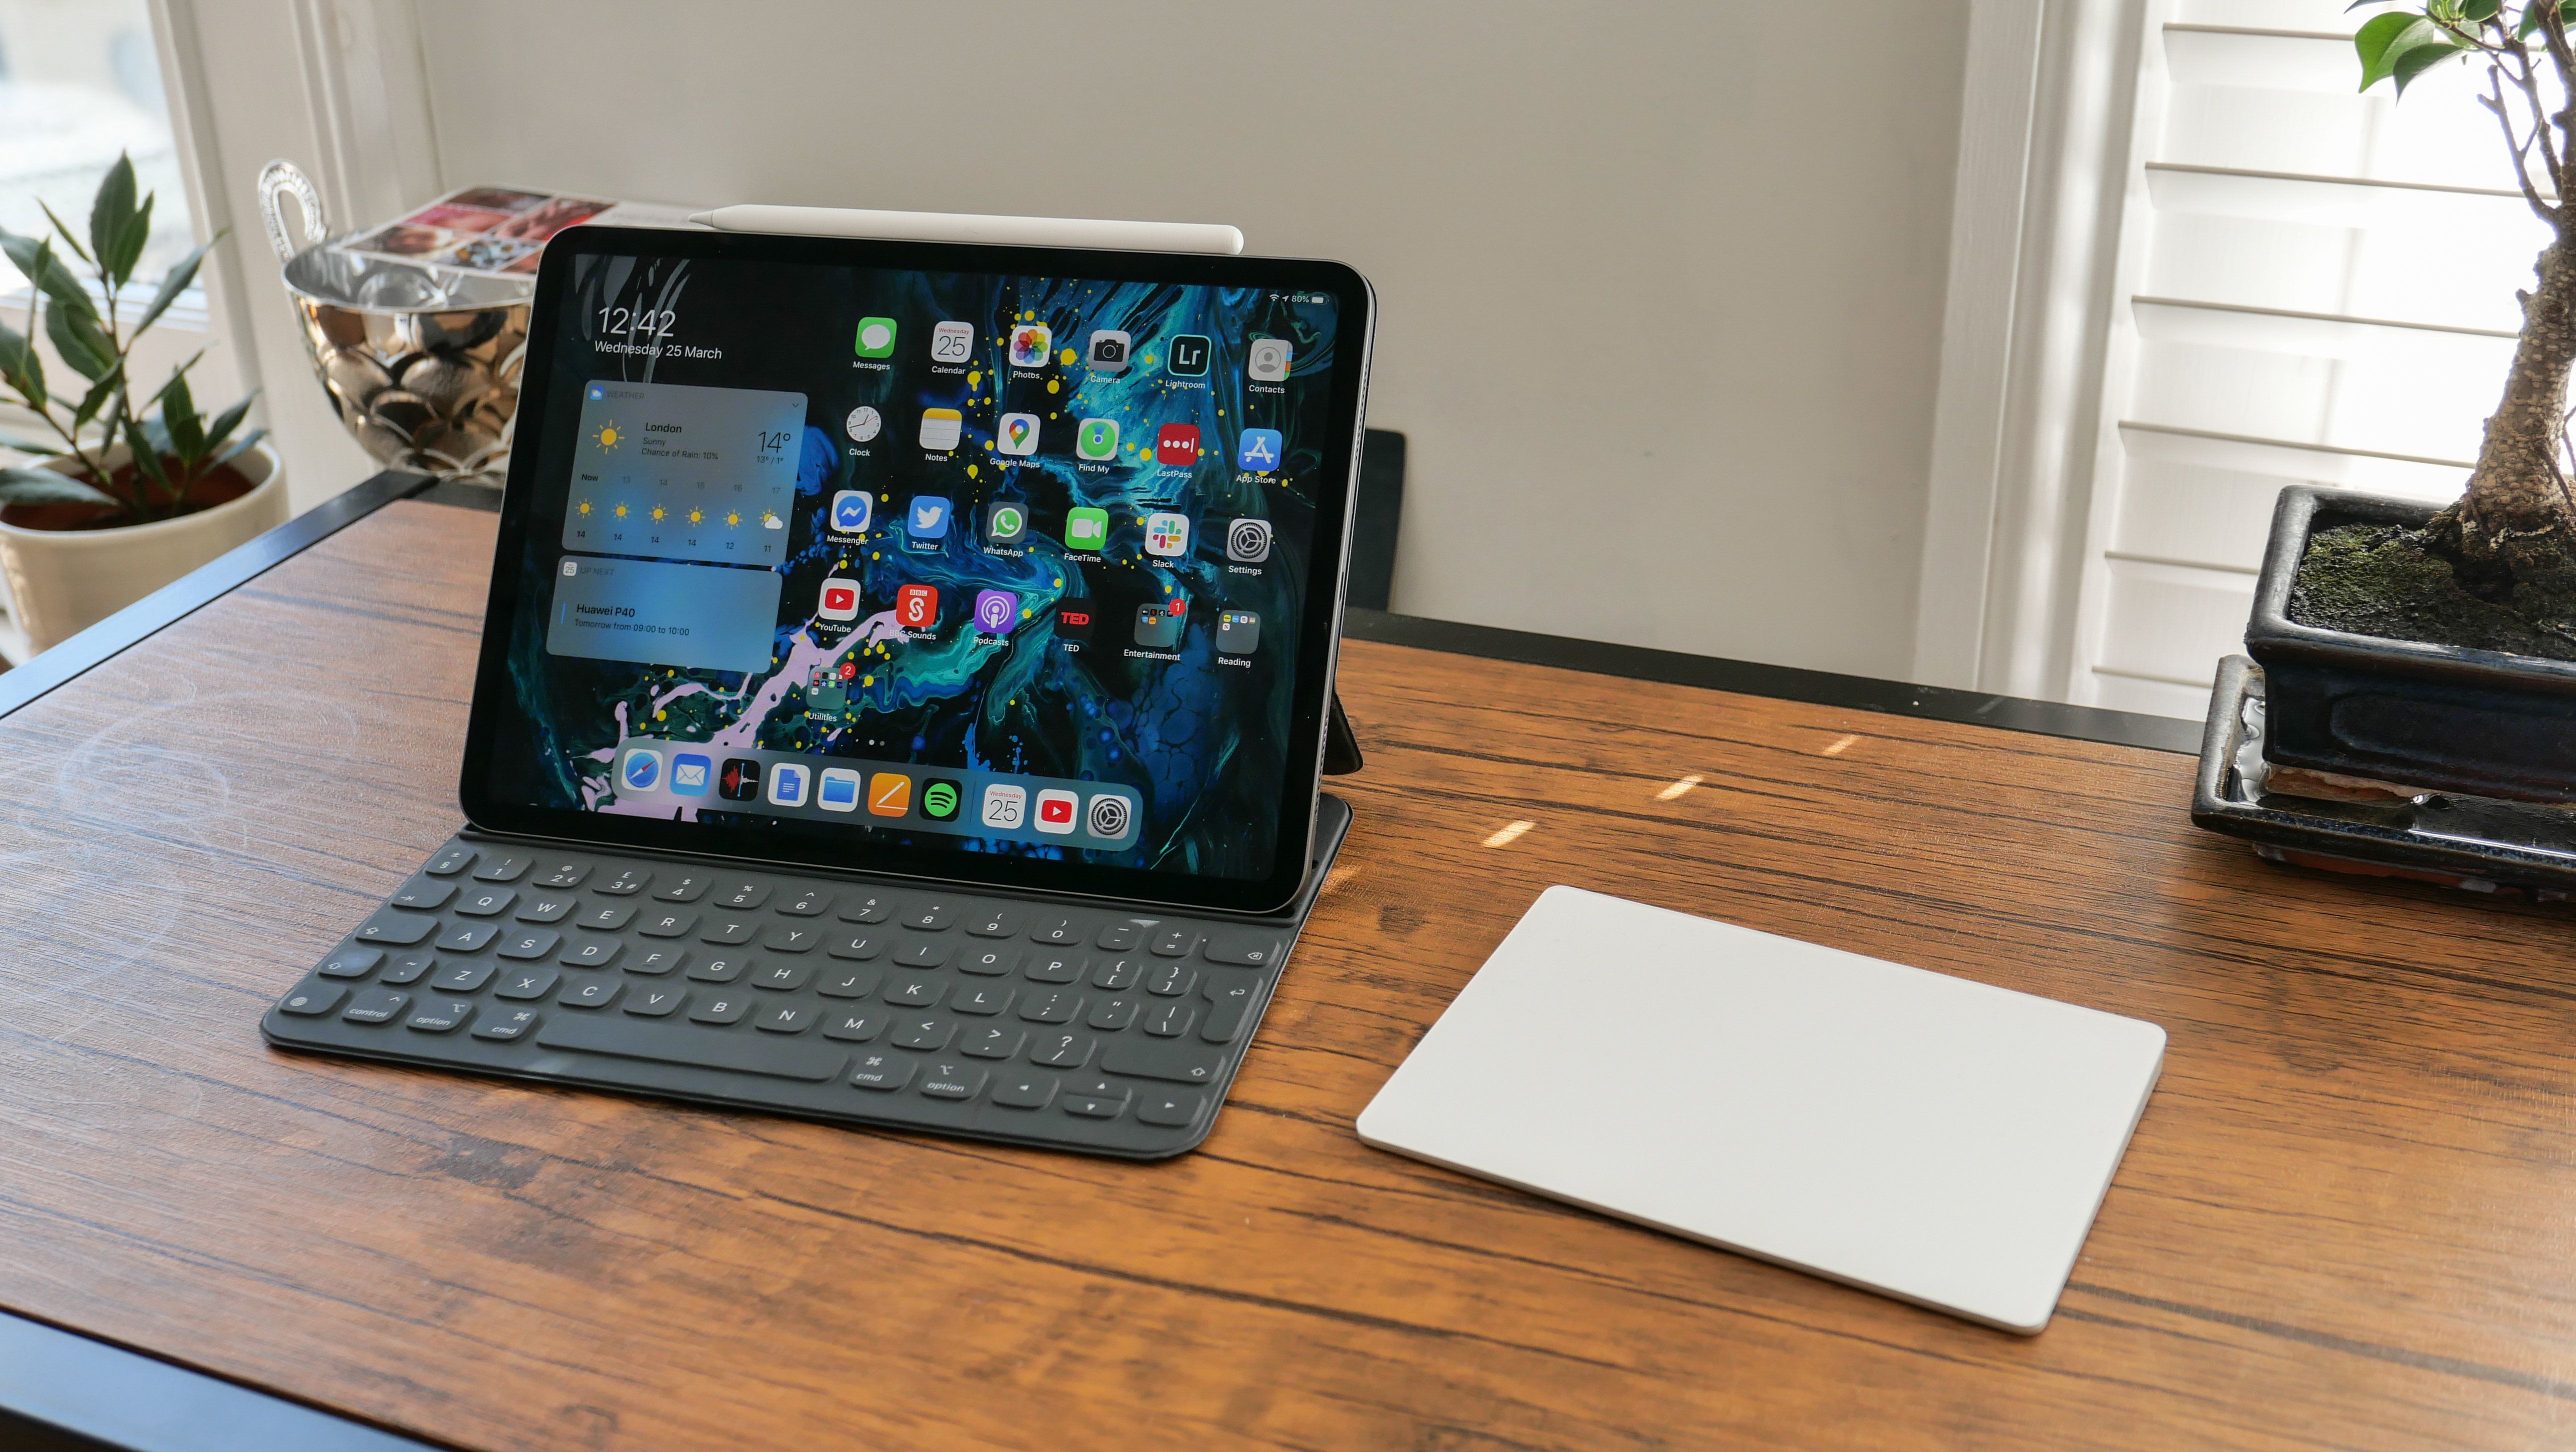 iPad with a keyboard, stylus and trackpad